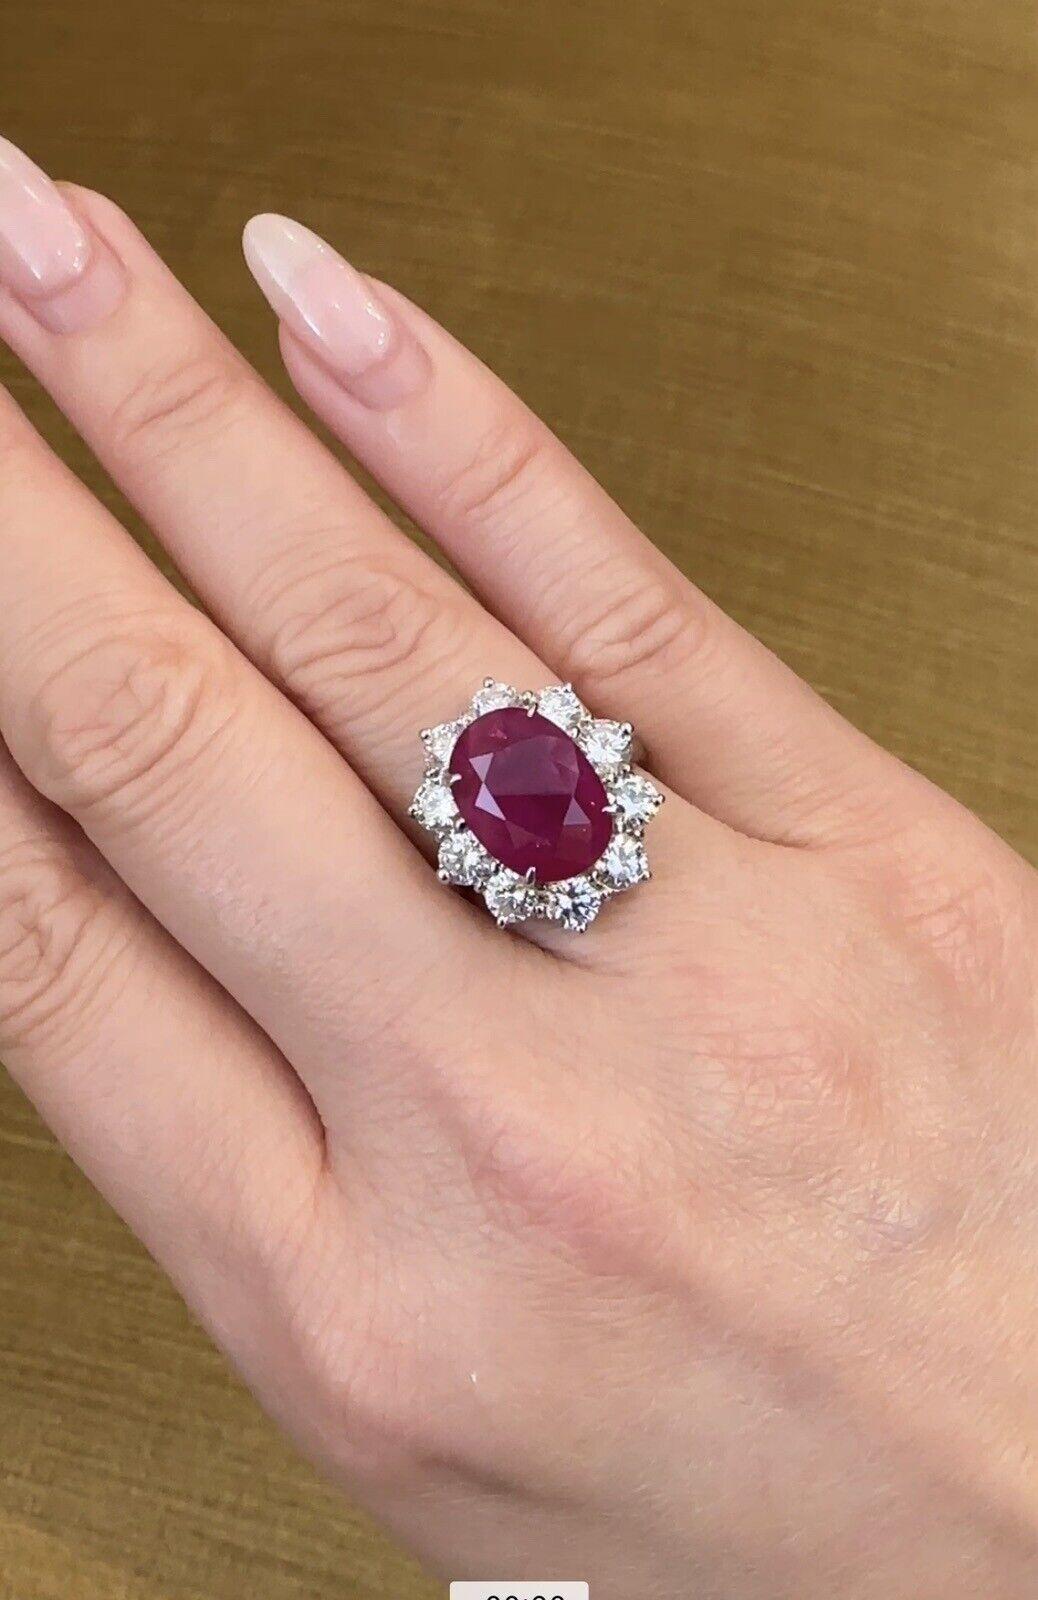 GIA Burma Heated Ruby 7.71 Carat Oval in Diamond Platinum Ring

Ruby and Diamond Ring features a large purplish-red Oval Ruby surrounded by 10 Round Brilliant Diamonds set in Platinum. The ruby originates from Burma(Myanmar) and has been heat